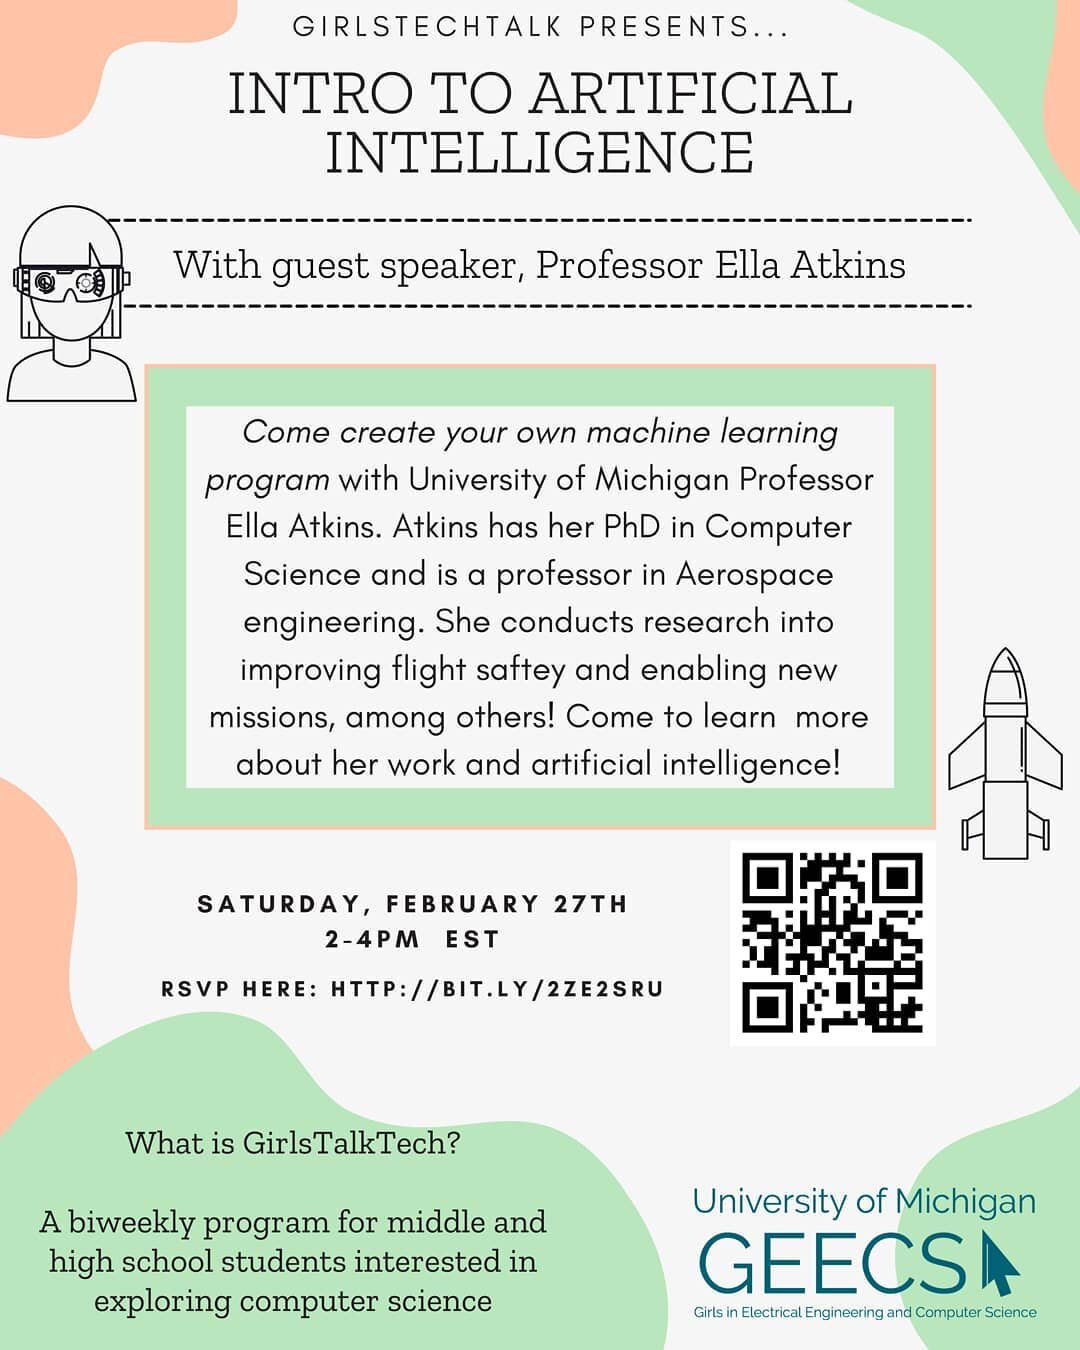 Hey! Join us for our Intro to AI session on 2/27 from 2pm - 4pm EST! RSVP at http://bit.ly/2Ze2srU